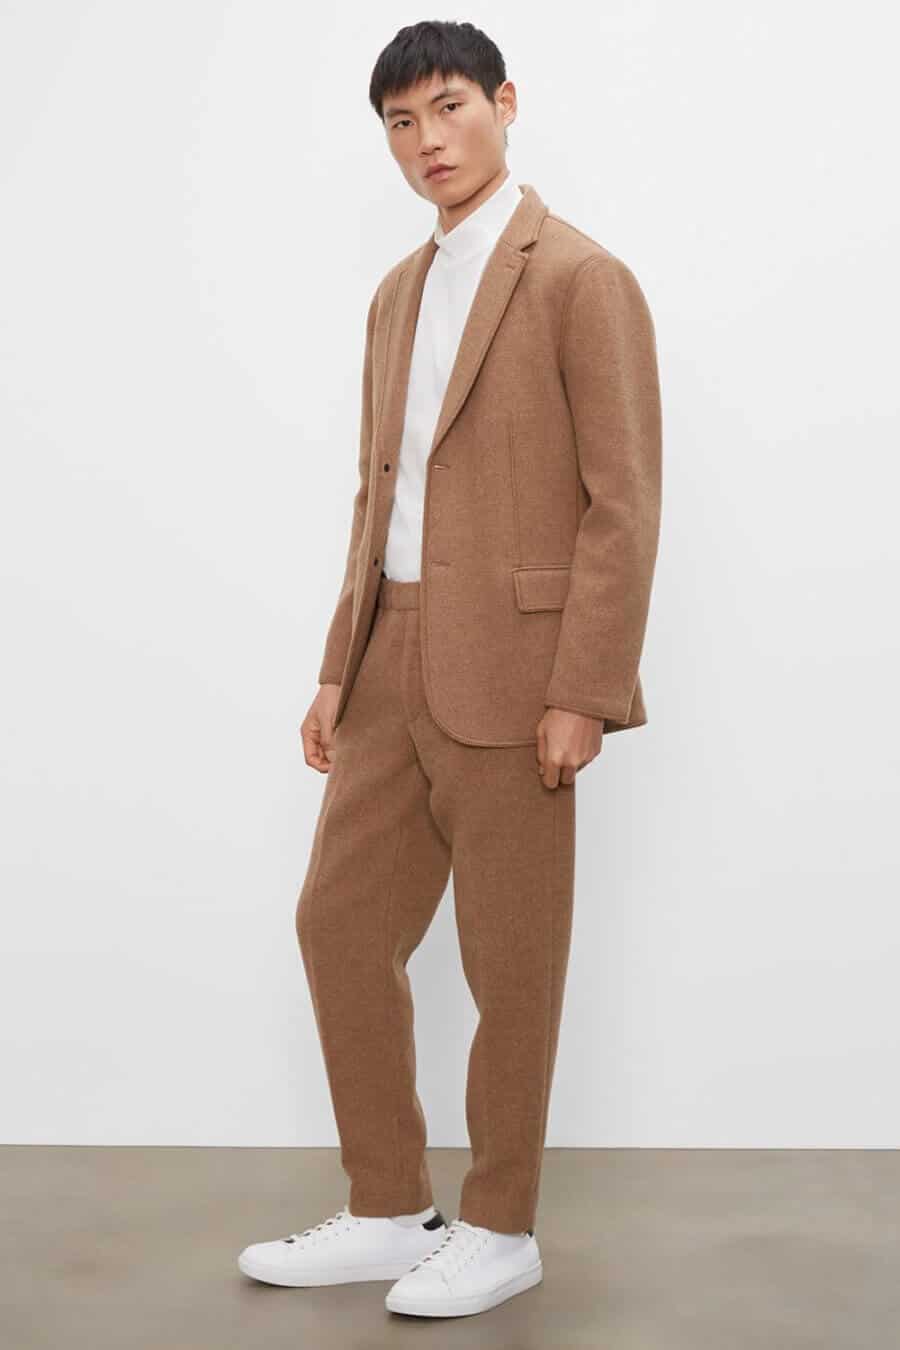 Men's wool brown suit and white turtleneck with white sneakers outfit